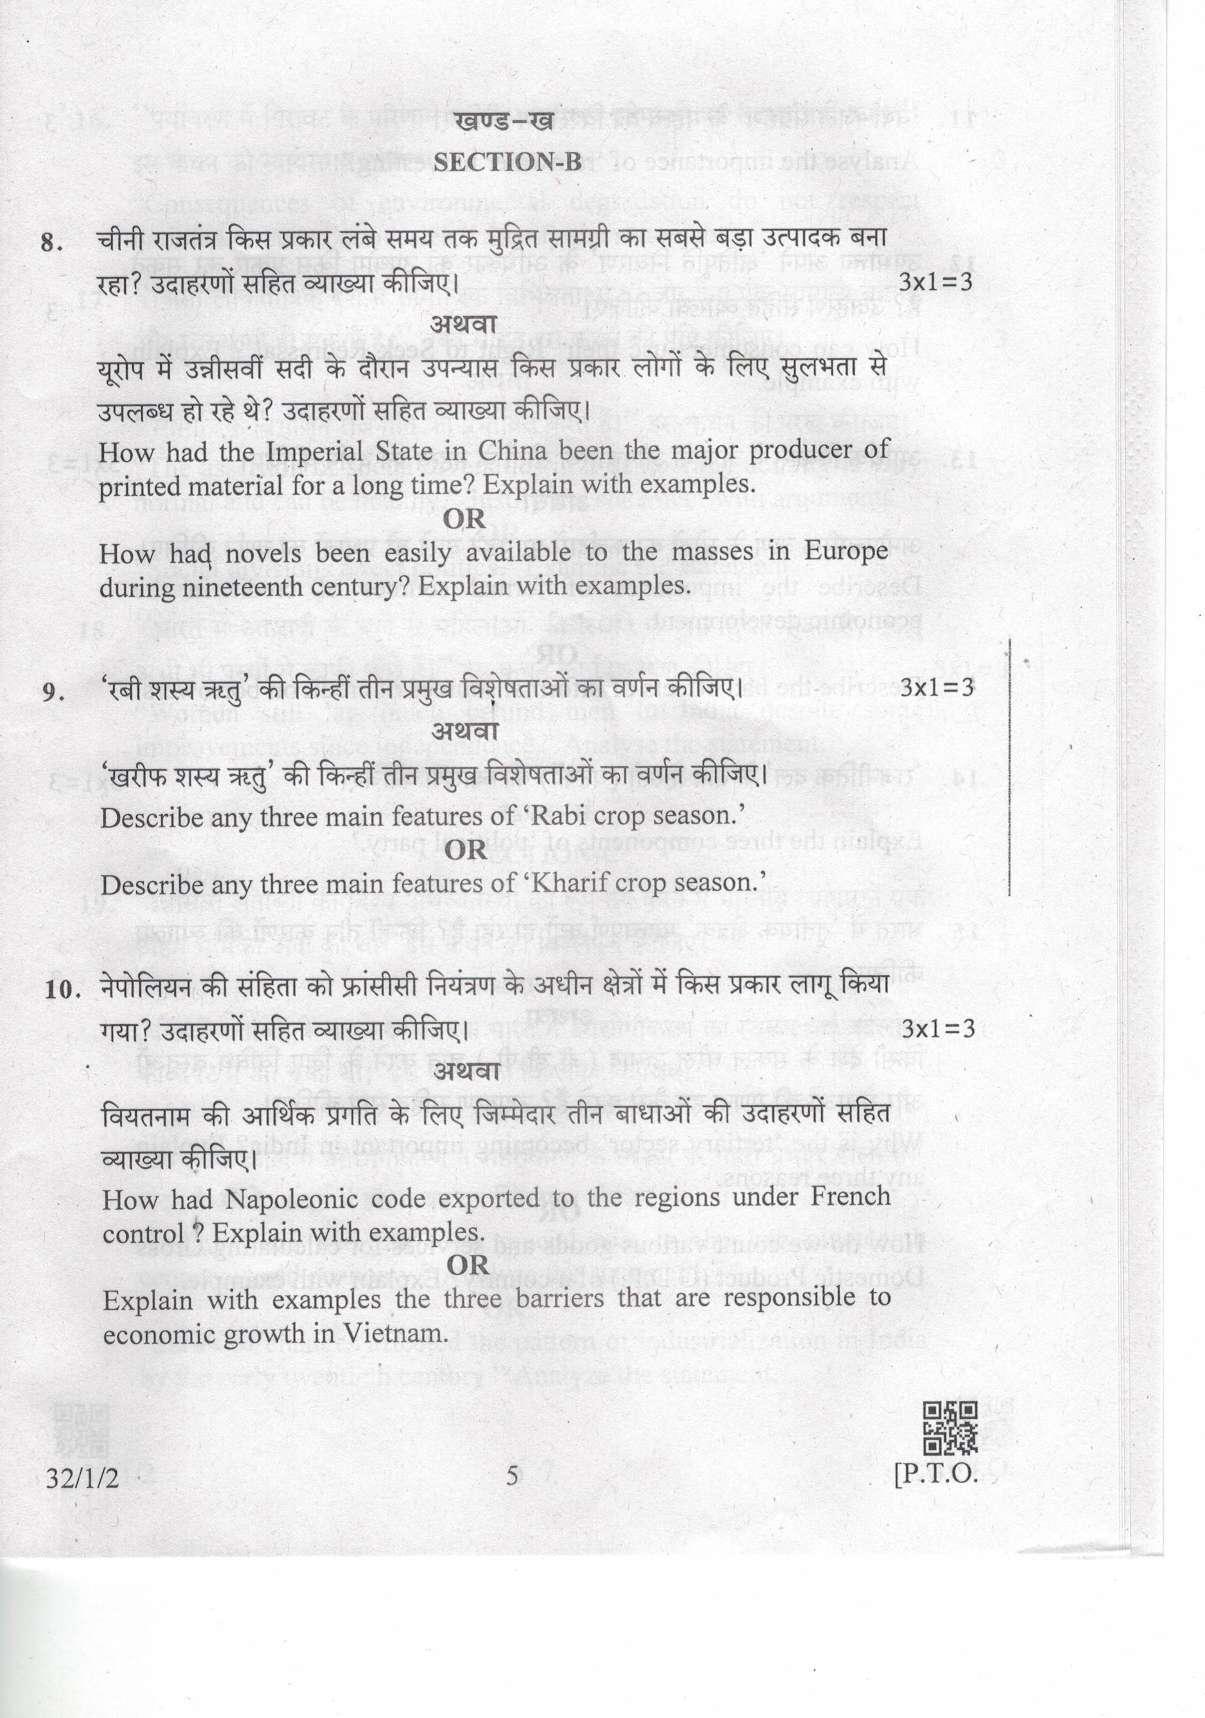 CBSE Class 10 32-1-2 Social Science 2019 Question Paper - Page 5